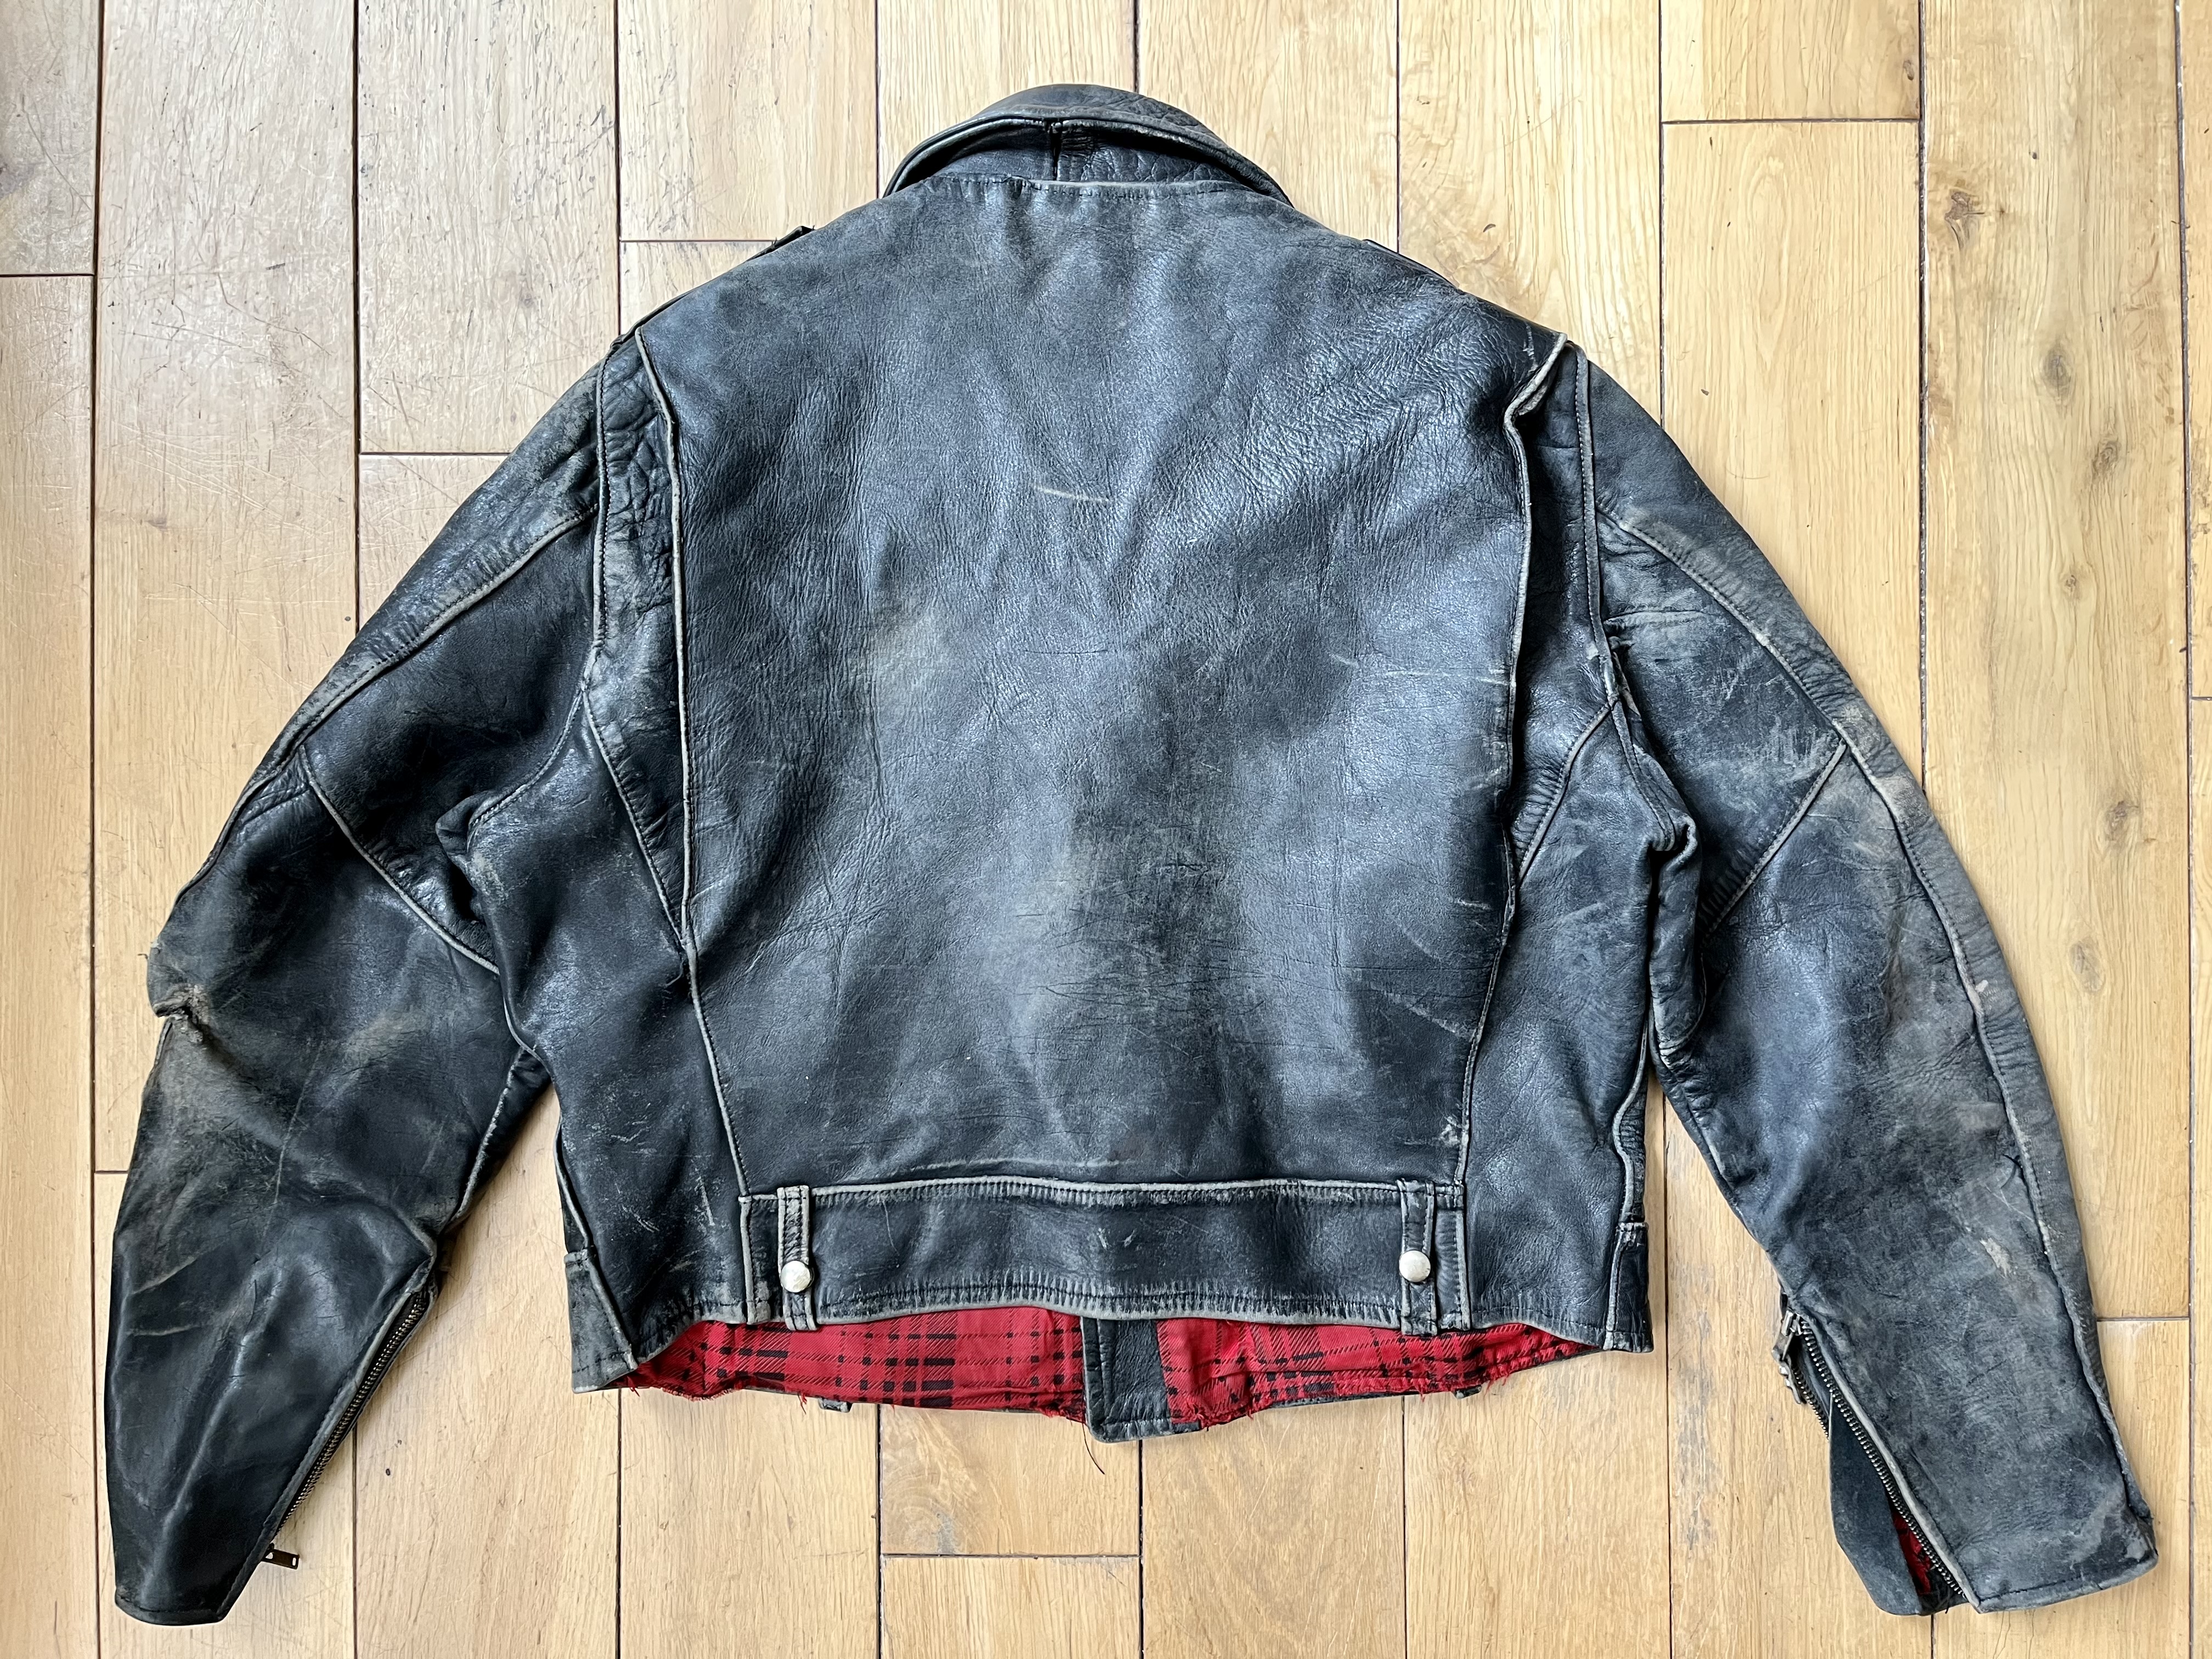 On the Roam x The Real McCoy's x Harley Leather jacket